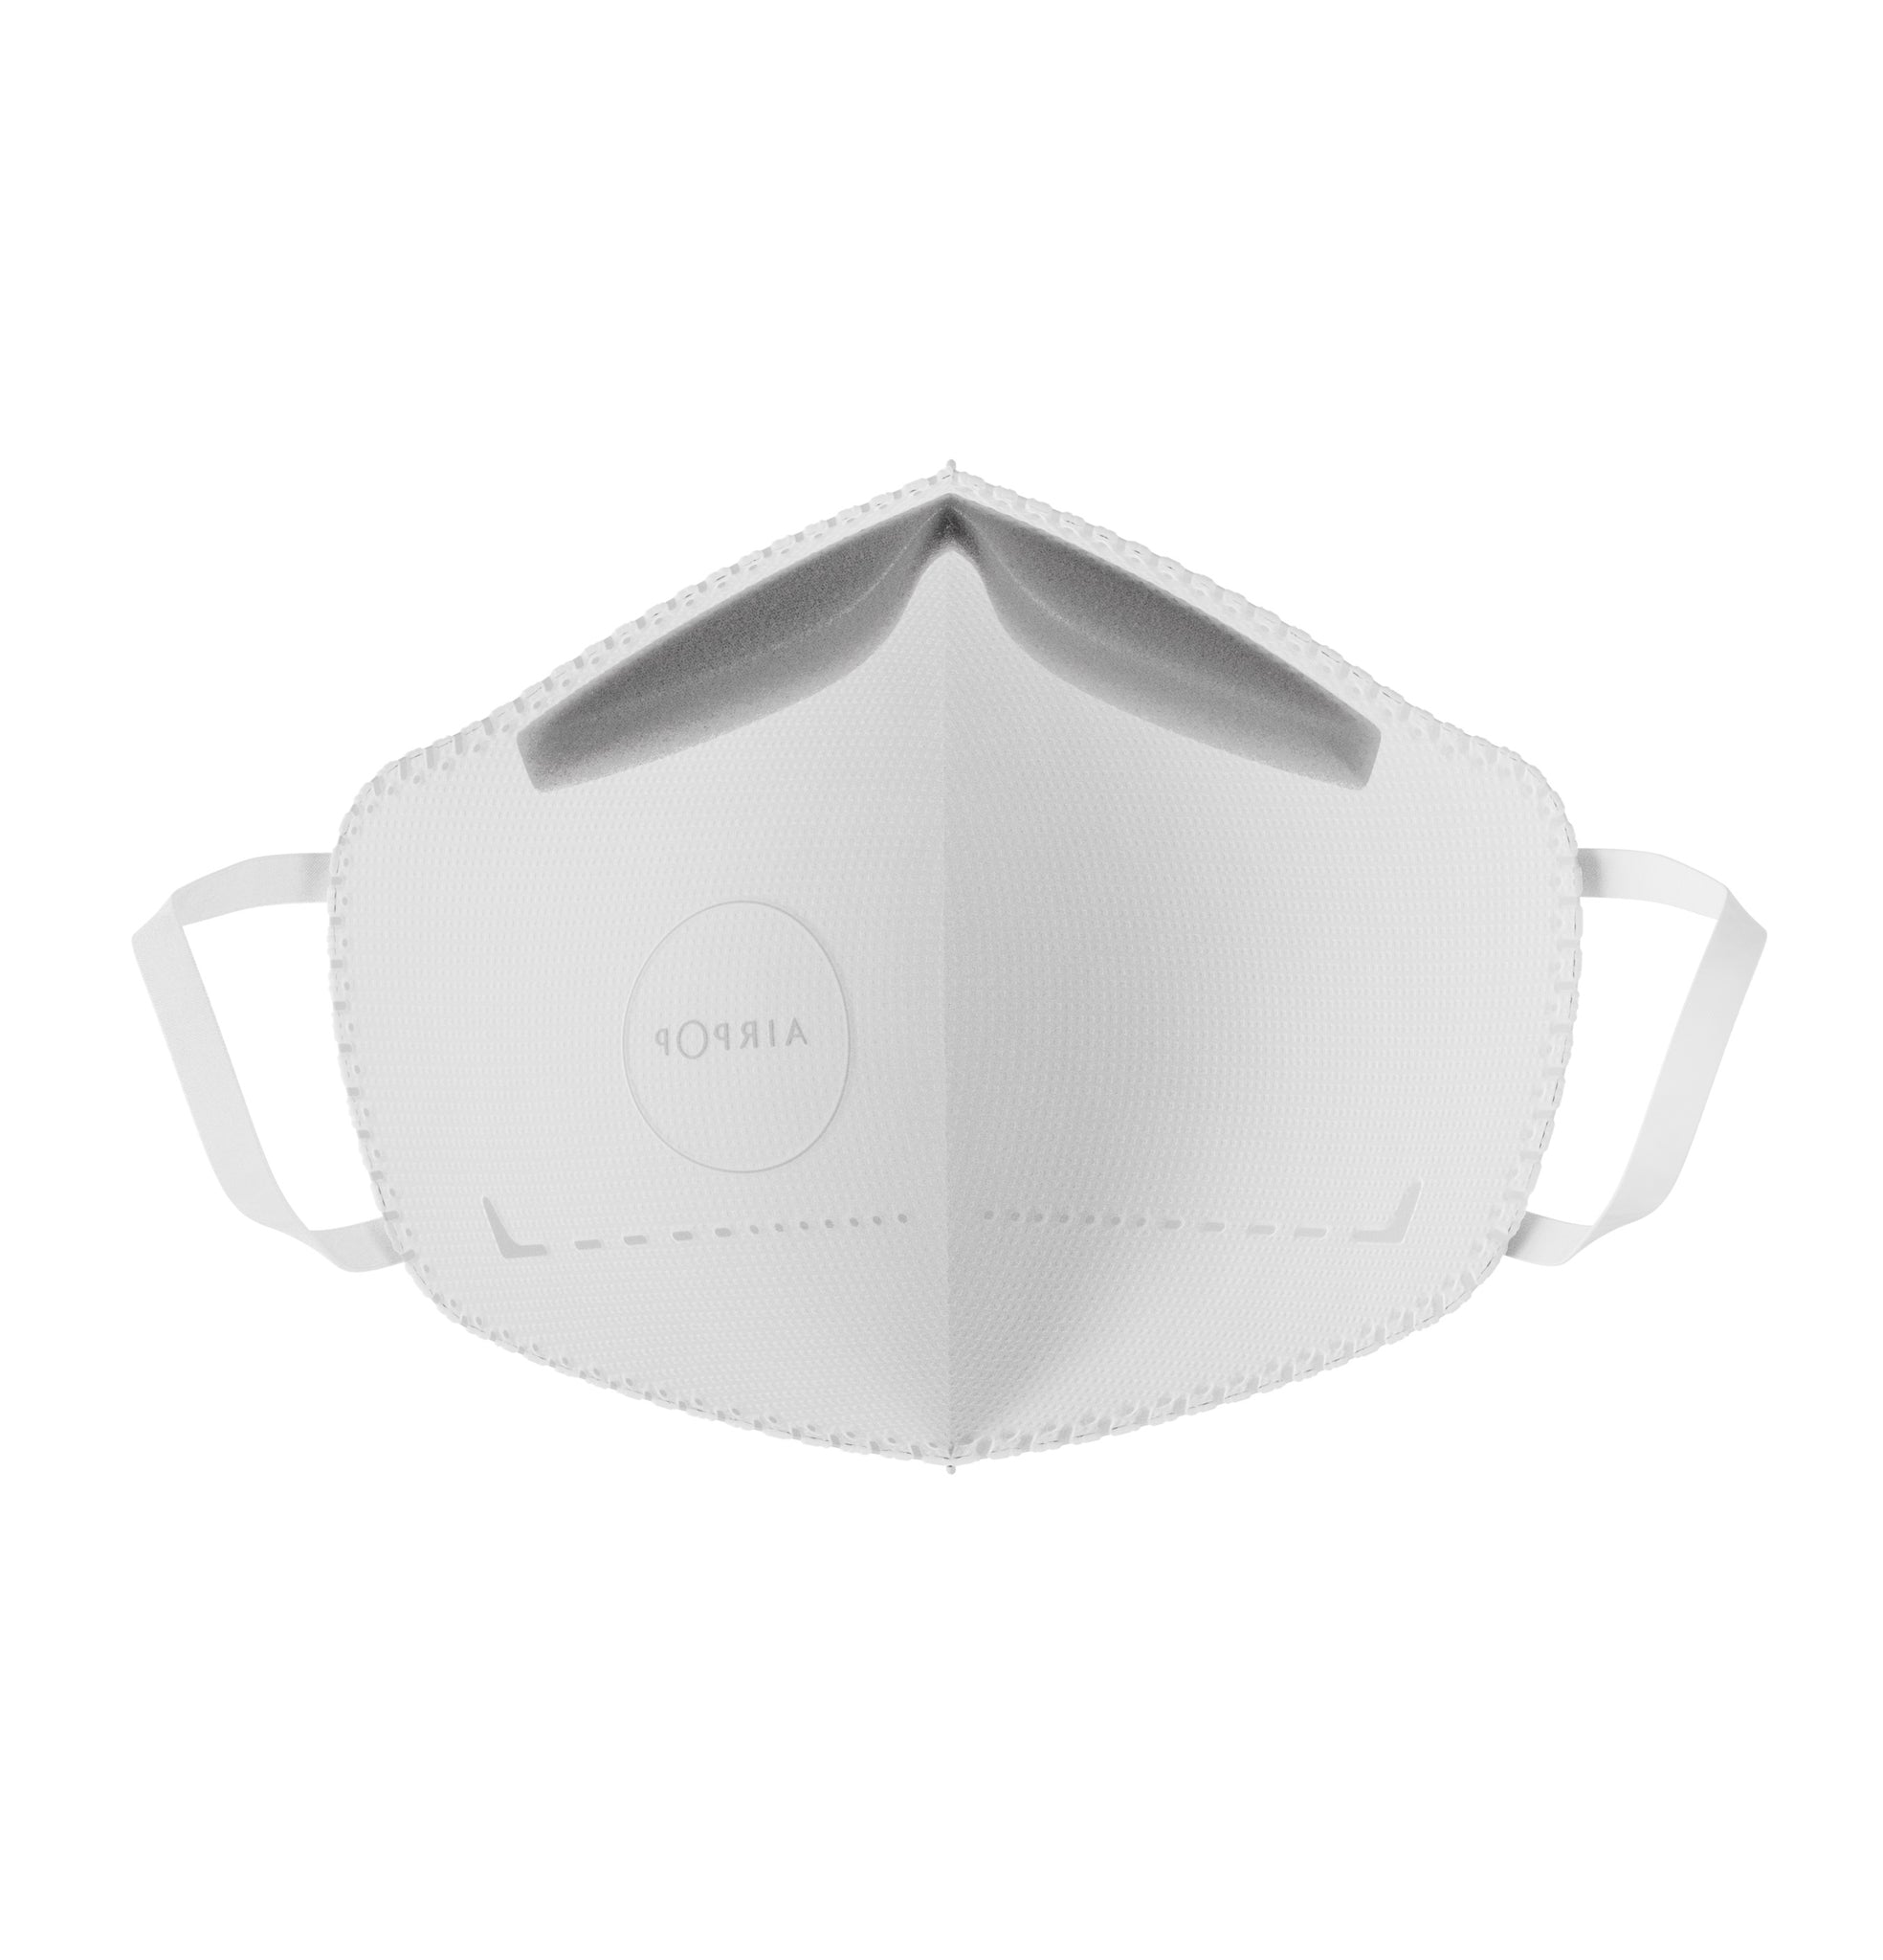 An AirPop Kids Mask on a white background, breathable and comfortable.